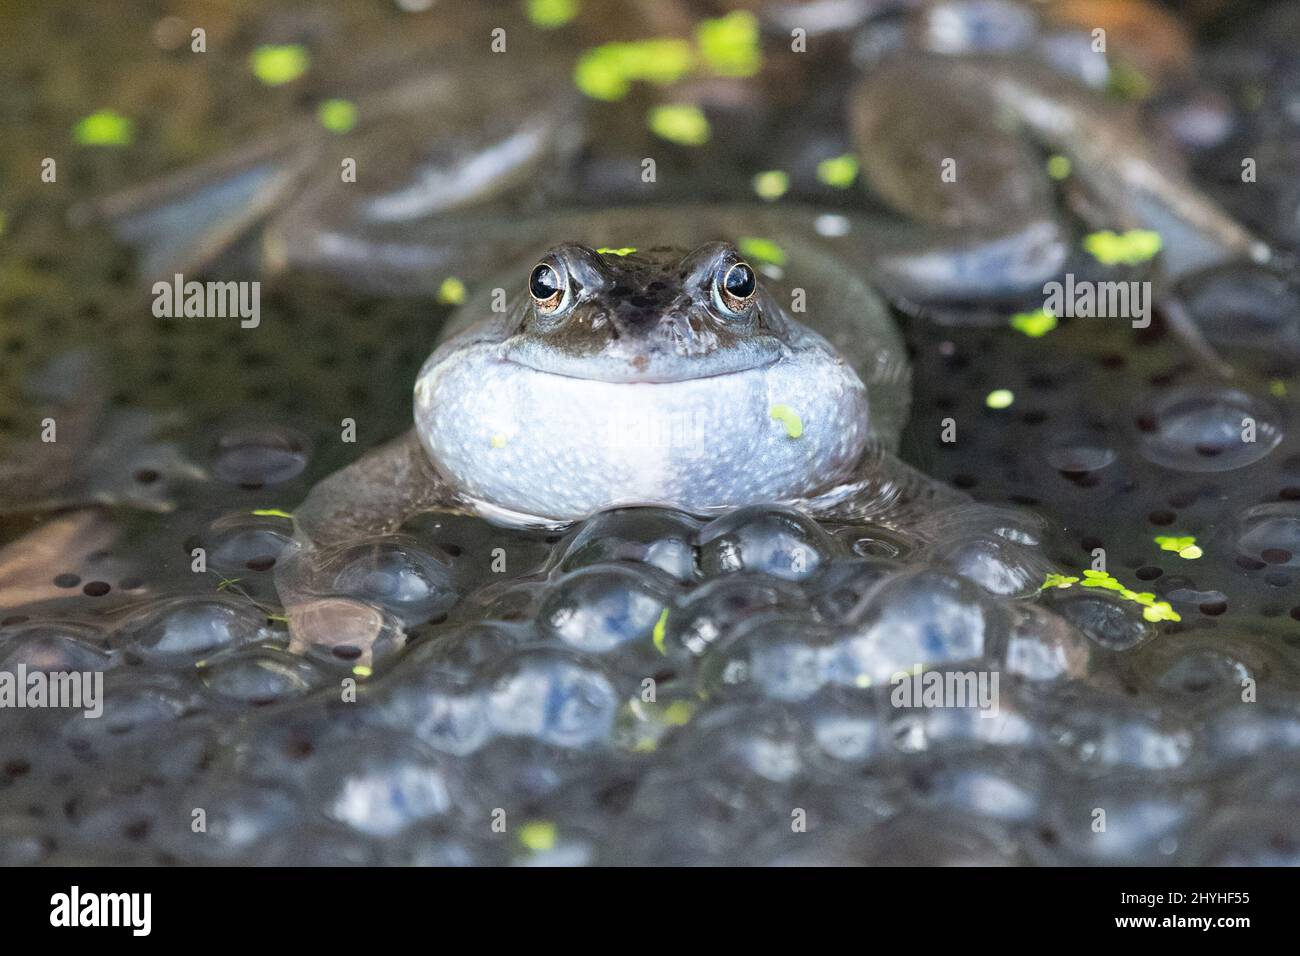 Male Common Frog with inflated vocal sac surrounded by frogspawn in garden wildlife pond - UK Stock Photo